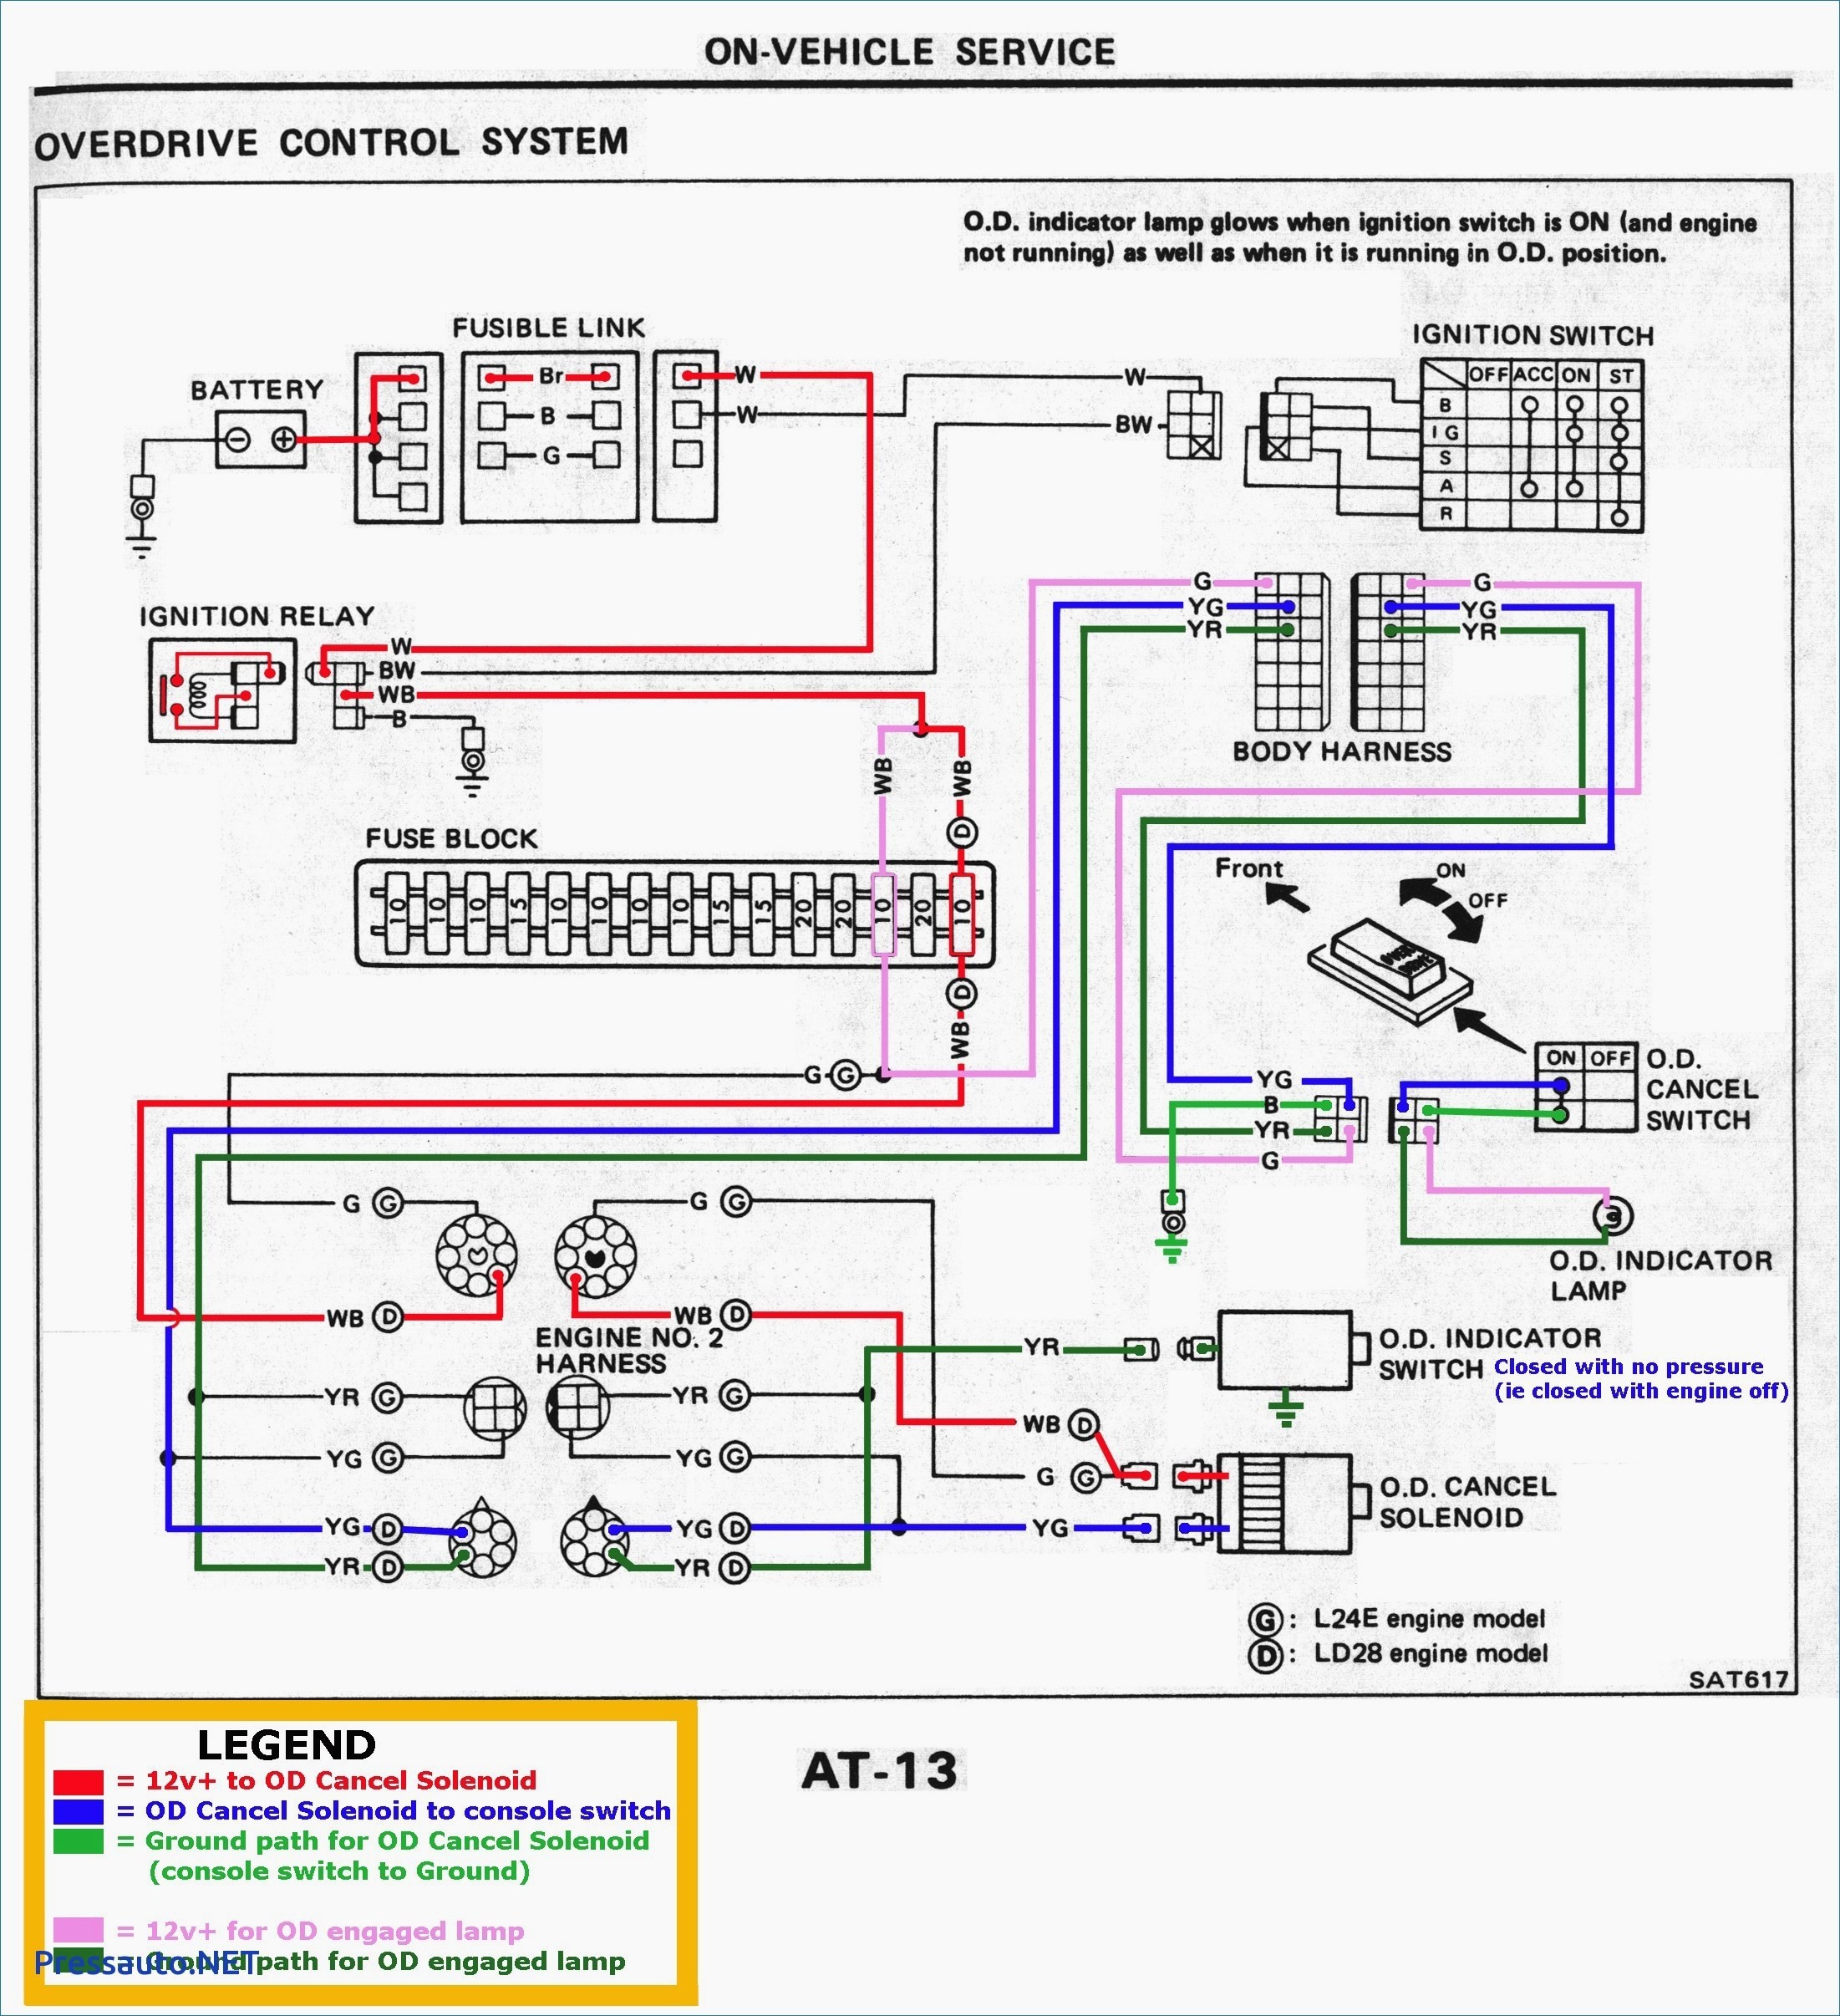 Wiring Diagram for Universal Ignition Switch Fresh Universal Ignition Switch Wiring Diagram Elegant Magnificent Wiring